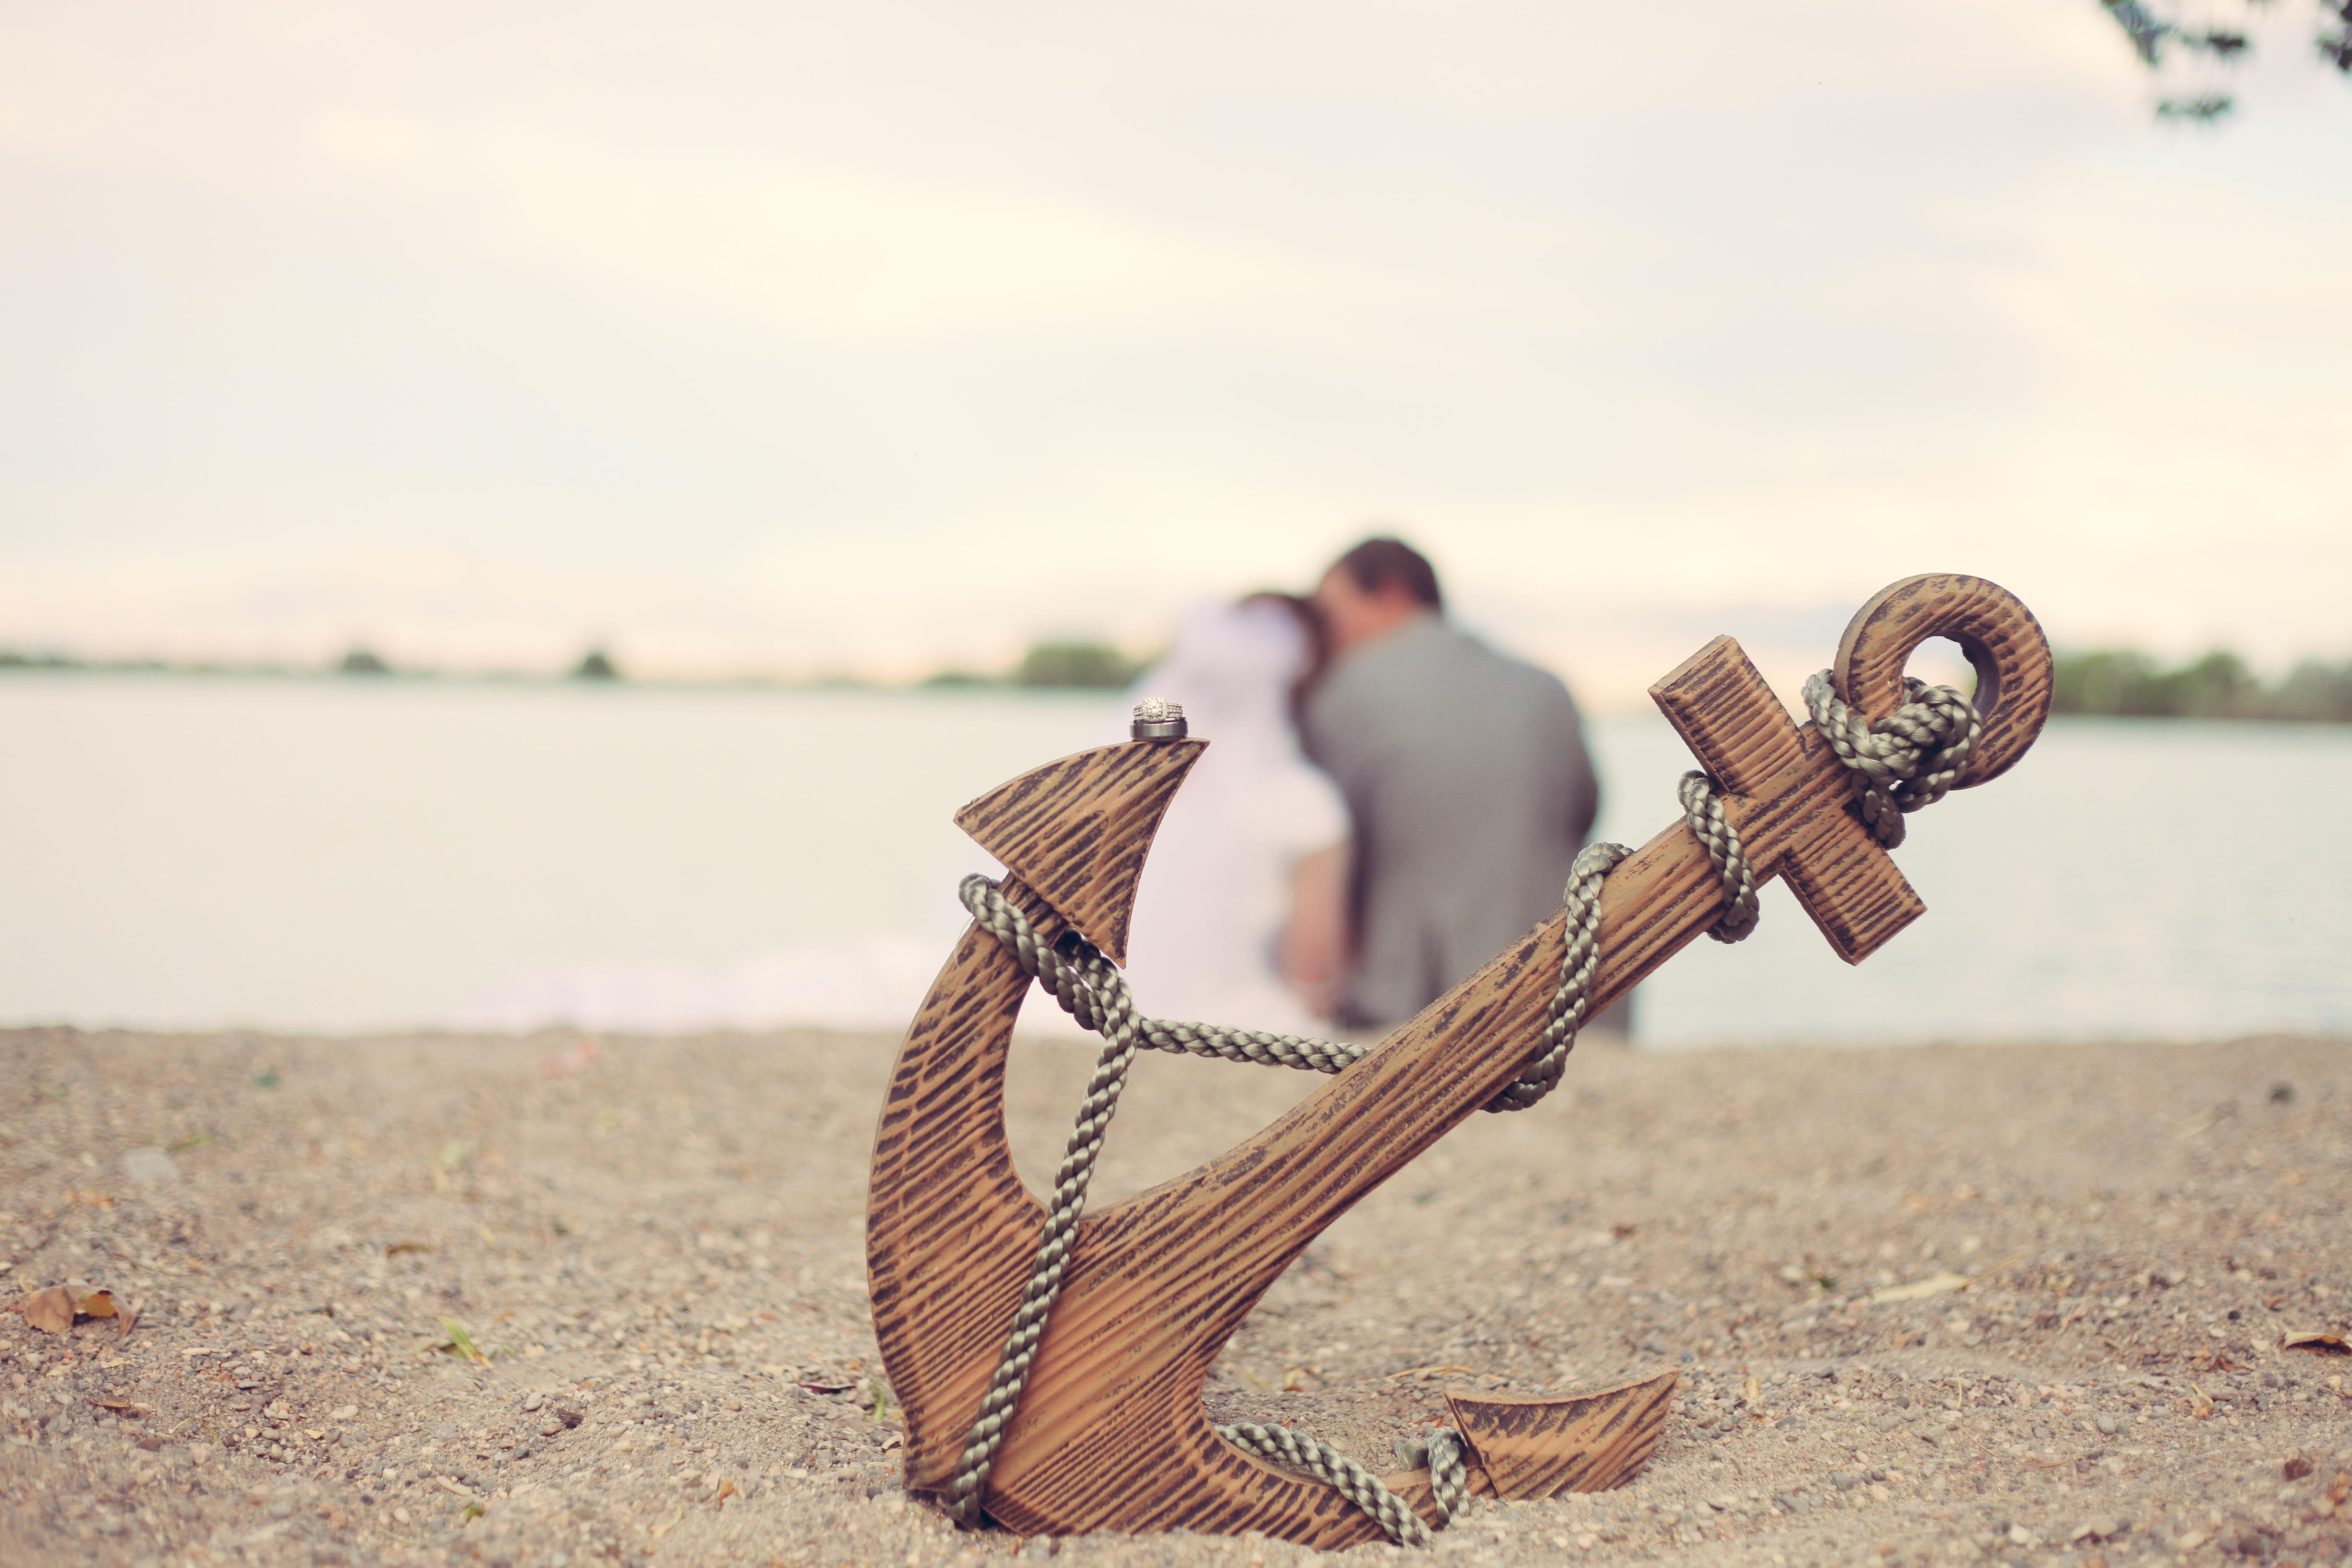 These pictures were taken FAR from the ocean!  The bride's wedding theme was oceans & anchors.  I love how we were able to work with this anchor and take a cool picture!  Don't forget to call us to do your wedding photography in Salt Lake, Wedding photography in Utah County, or wedding photography in Payson Utah at the new LDS temple!  